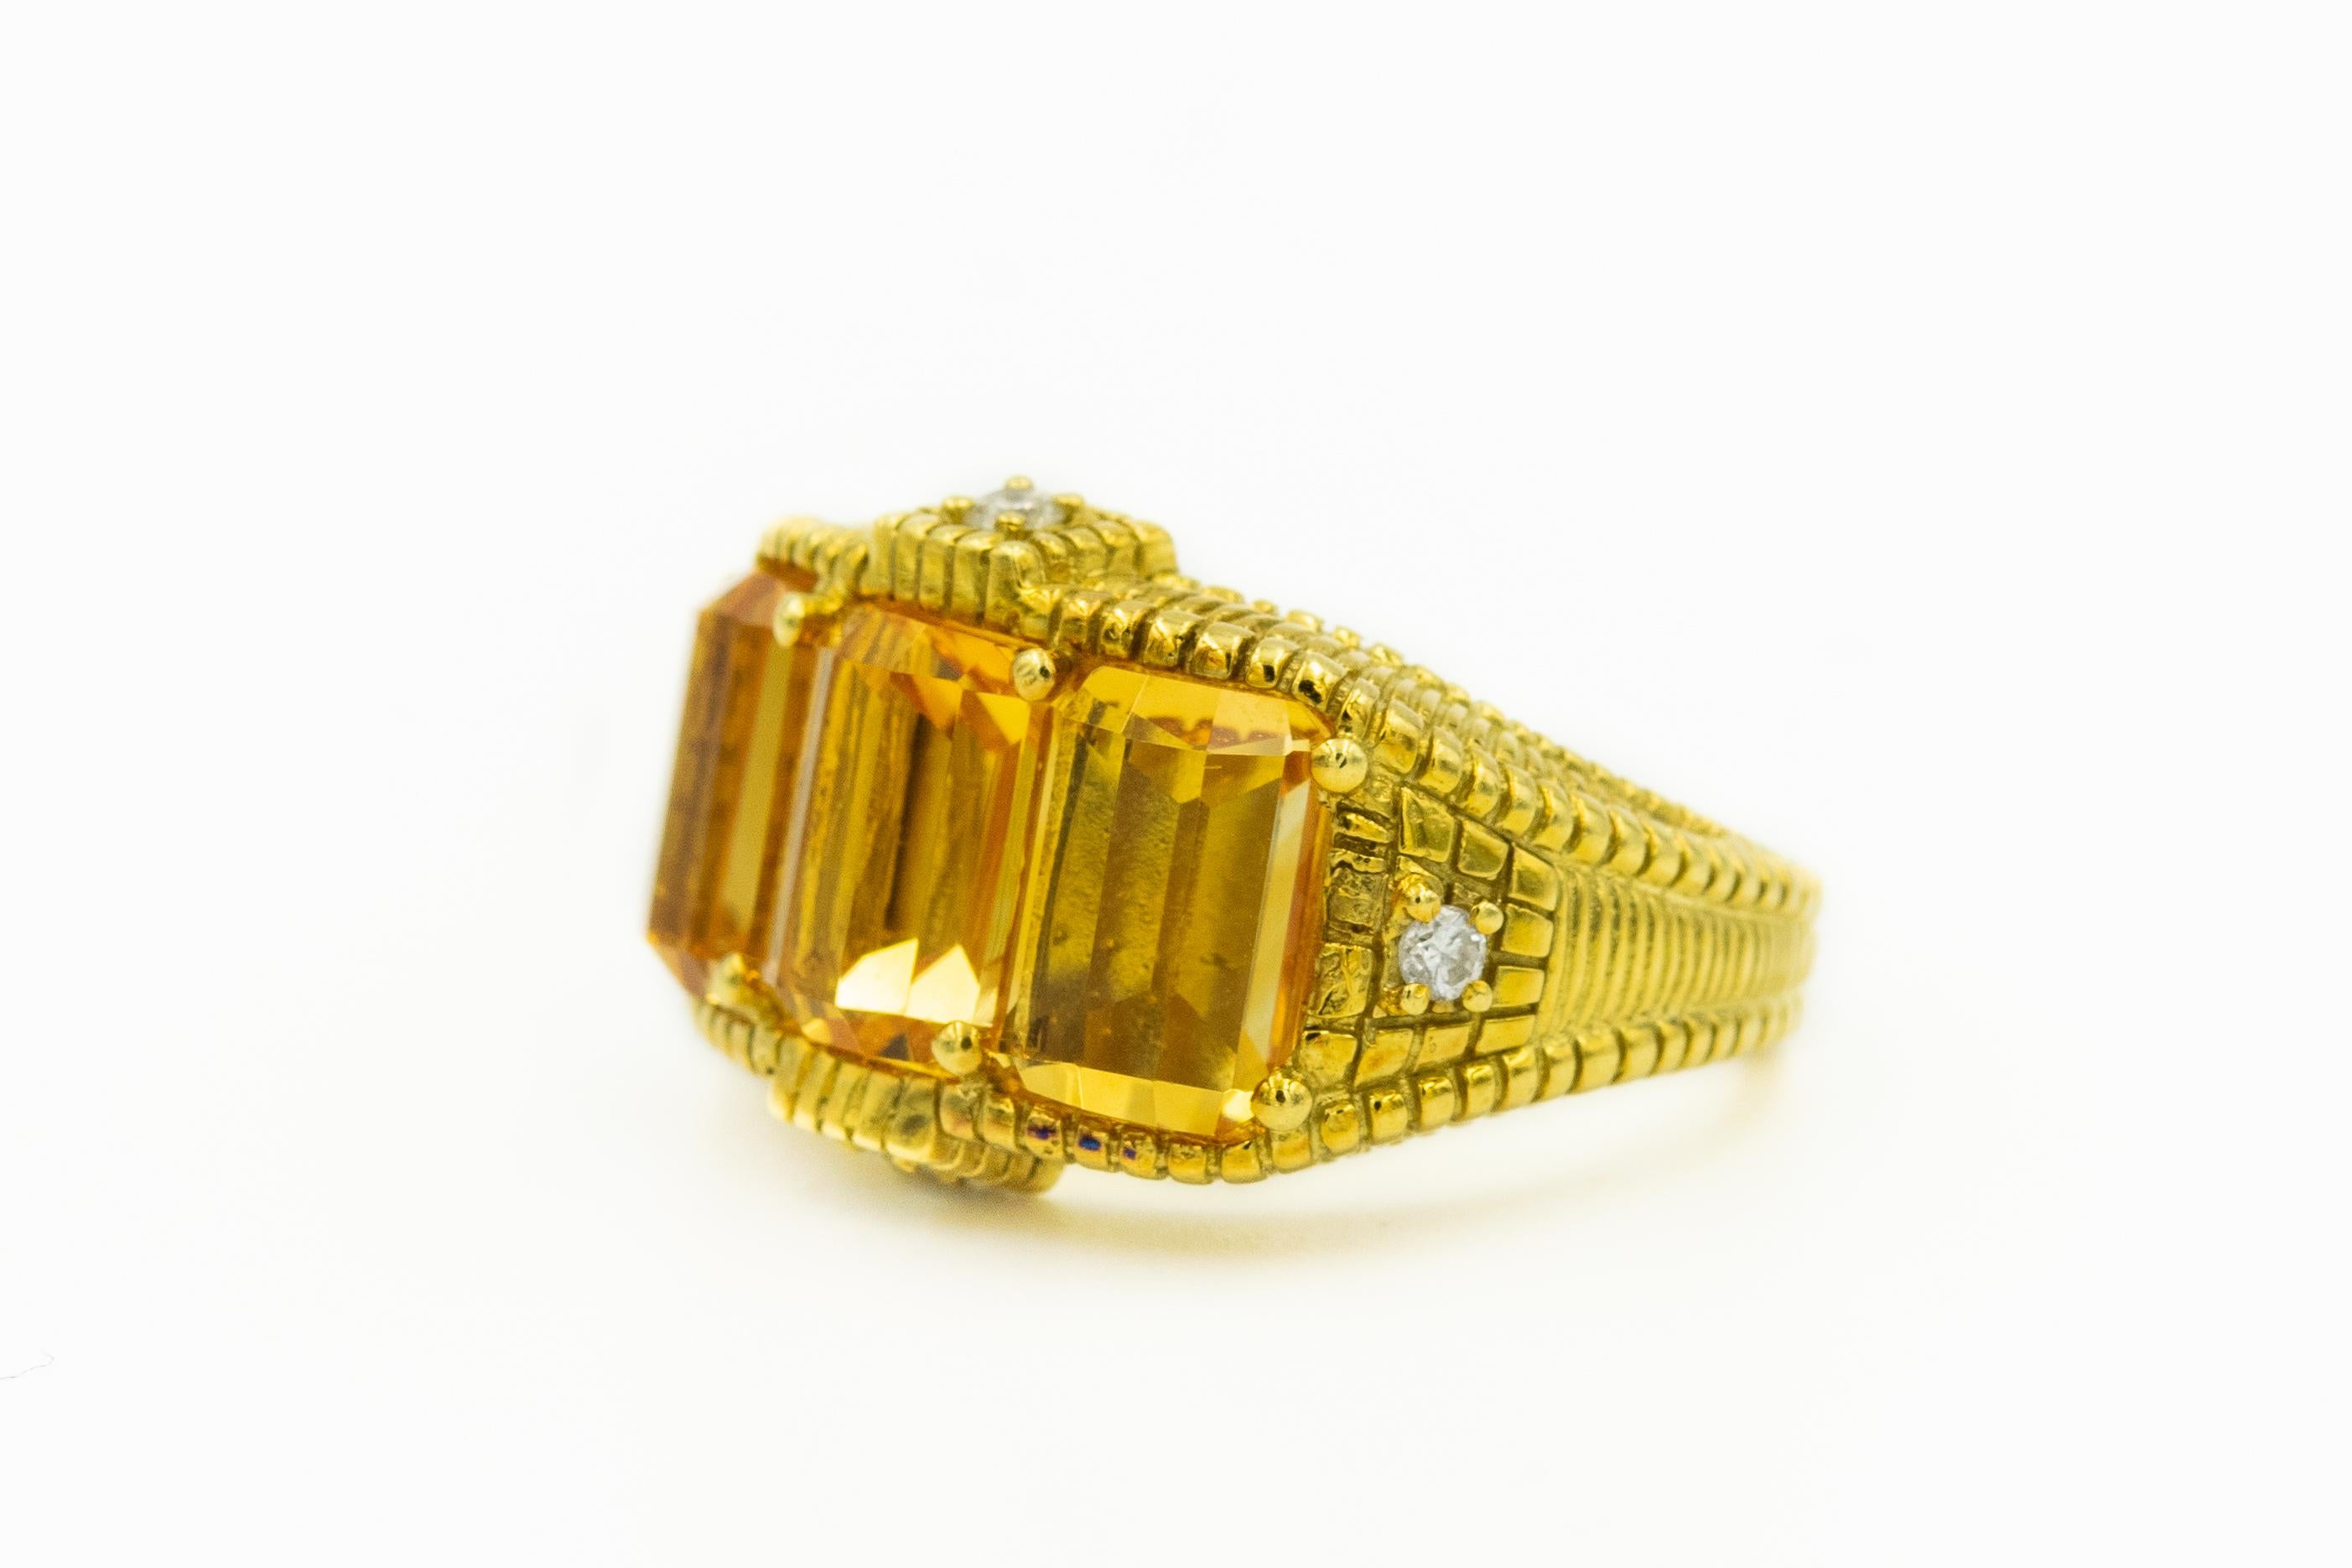 Judith Ripka cocktail ring featuring three emerald cut citrines and four small round brilliant diamonds accents mounted in an 18k yellow gold highly stylized textured mounting.

US size 7.5.

Marked Judith Ripka 18k
